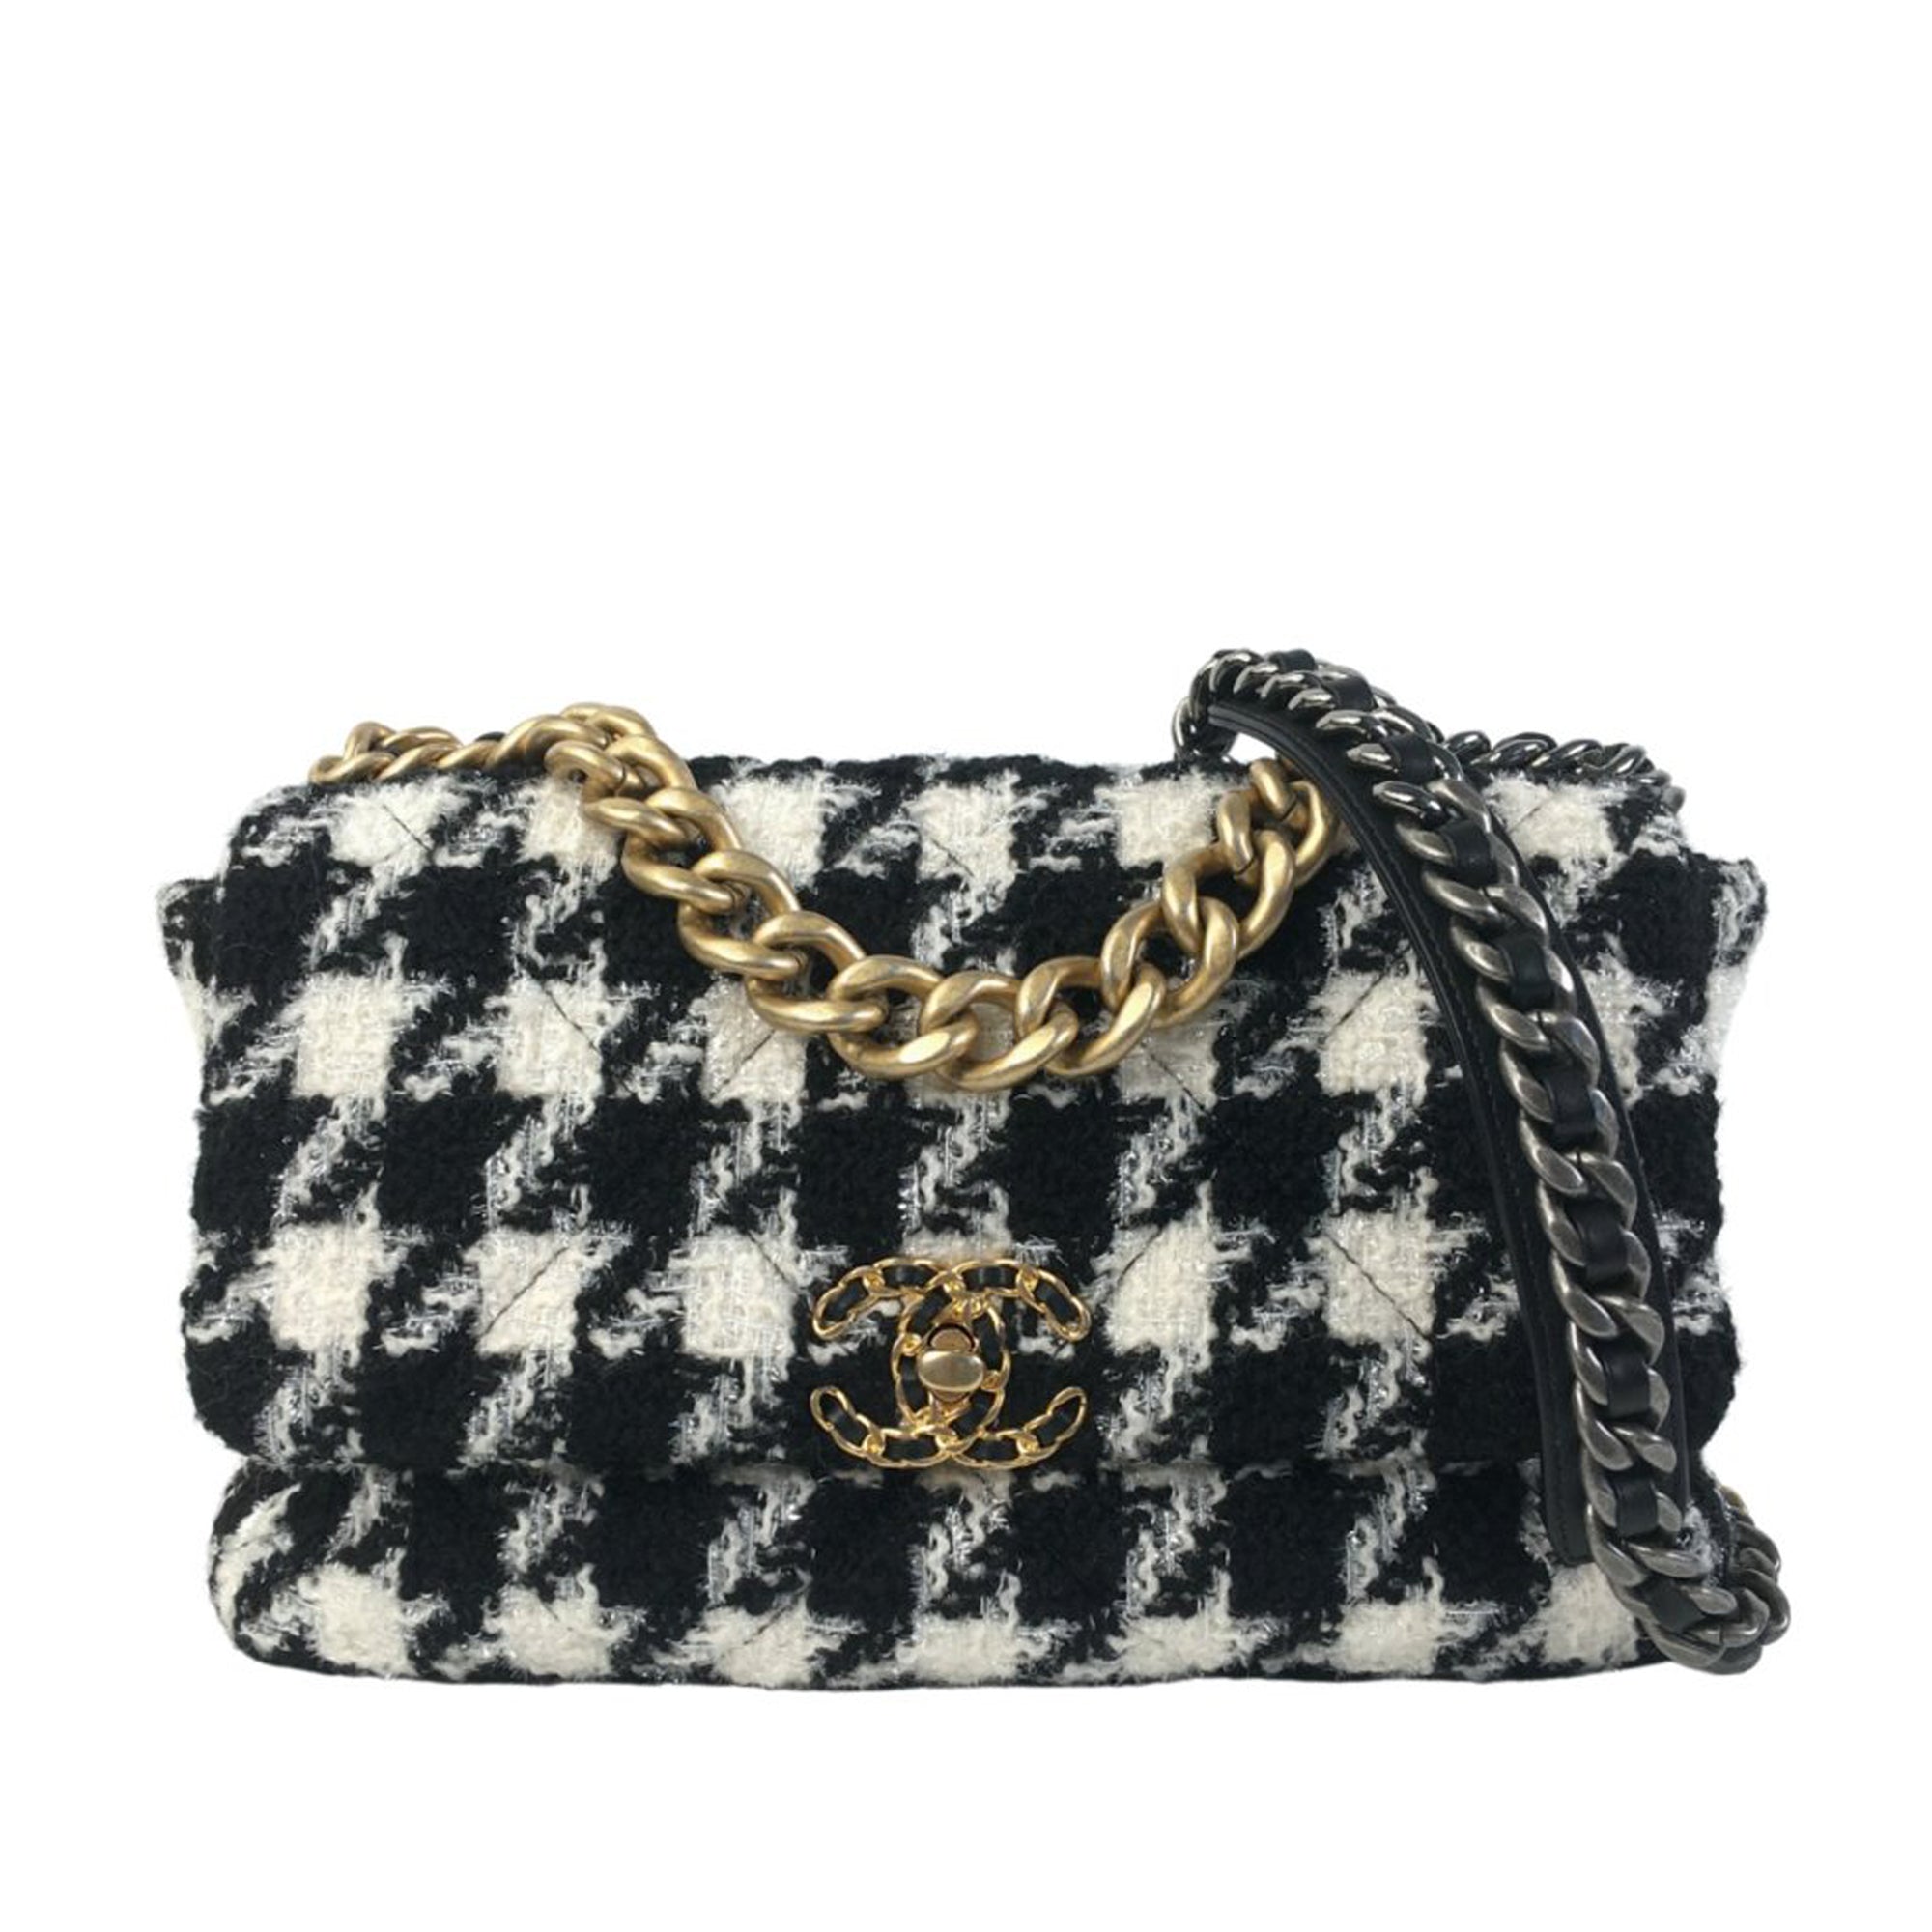 Chanel - Authenticated Handbag - Tweed Black Houndstooth for Women, Very Good Condition